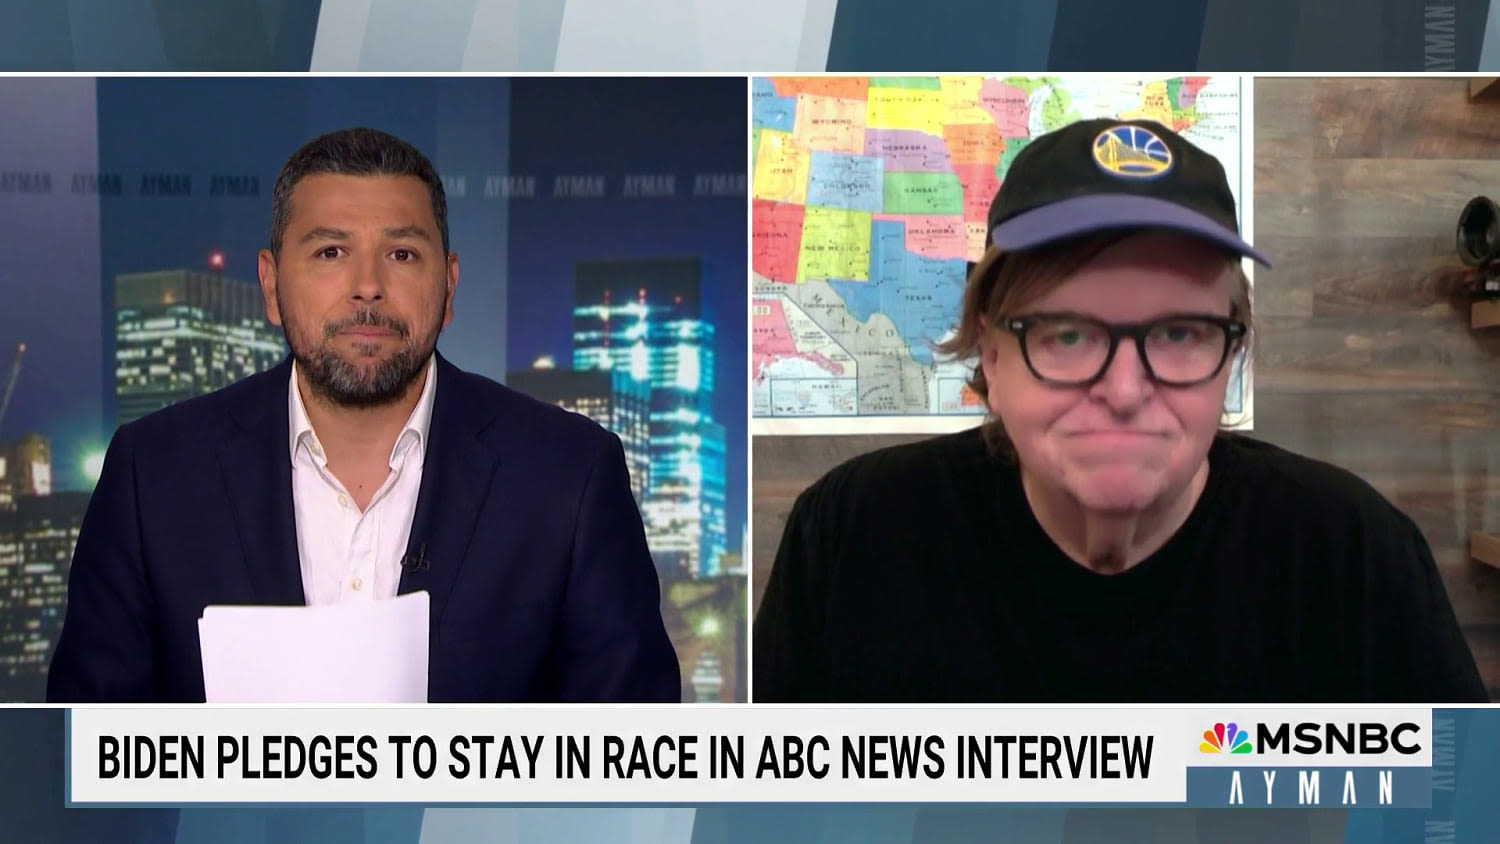 Michael Moore on Biden's advisers: "There's a form of elder abuse going on"